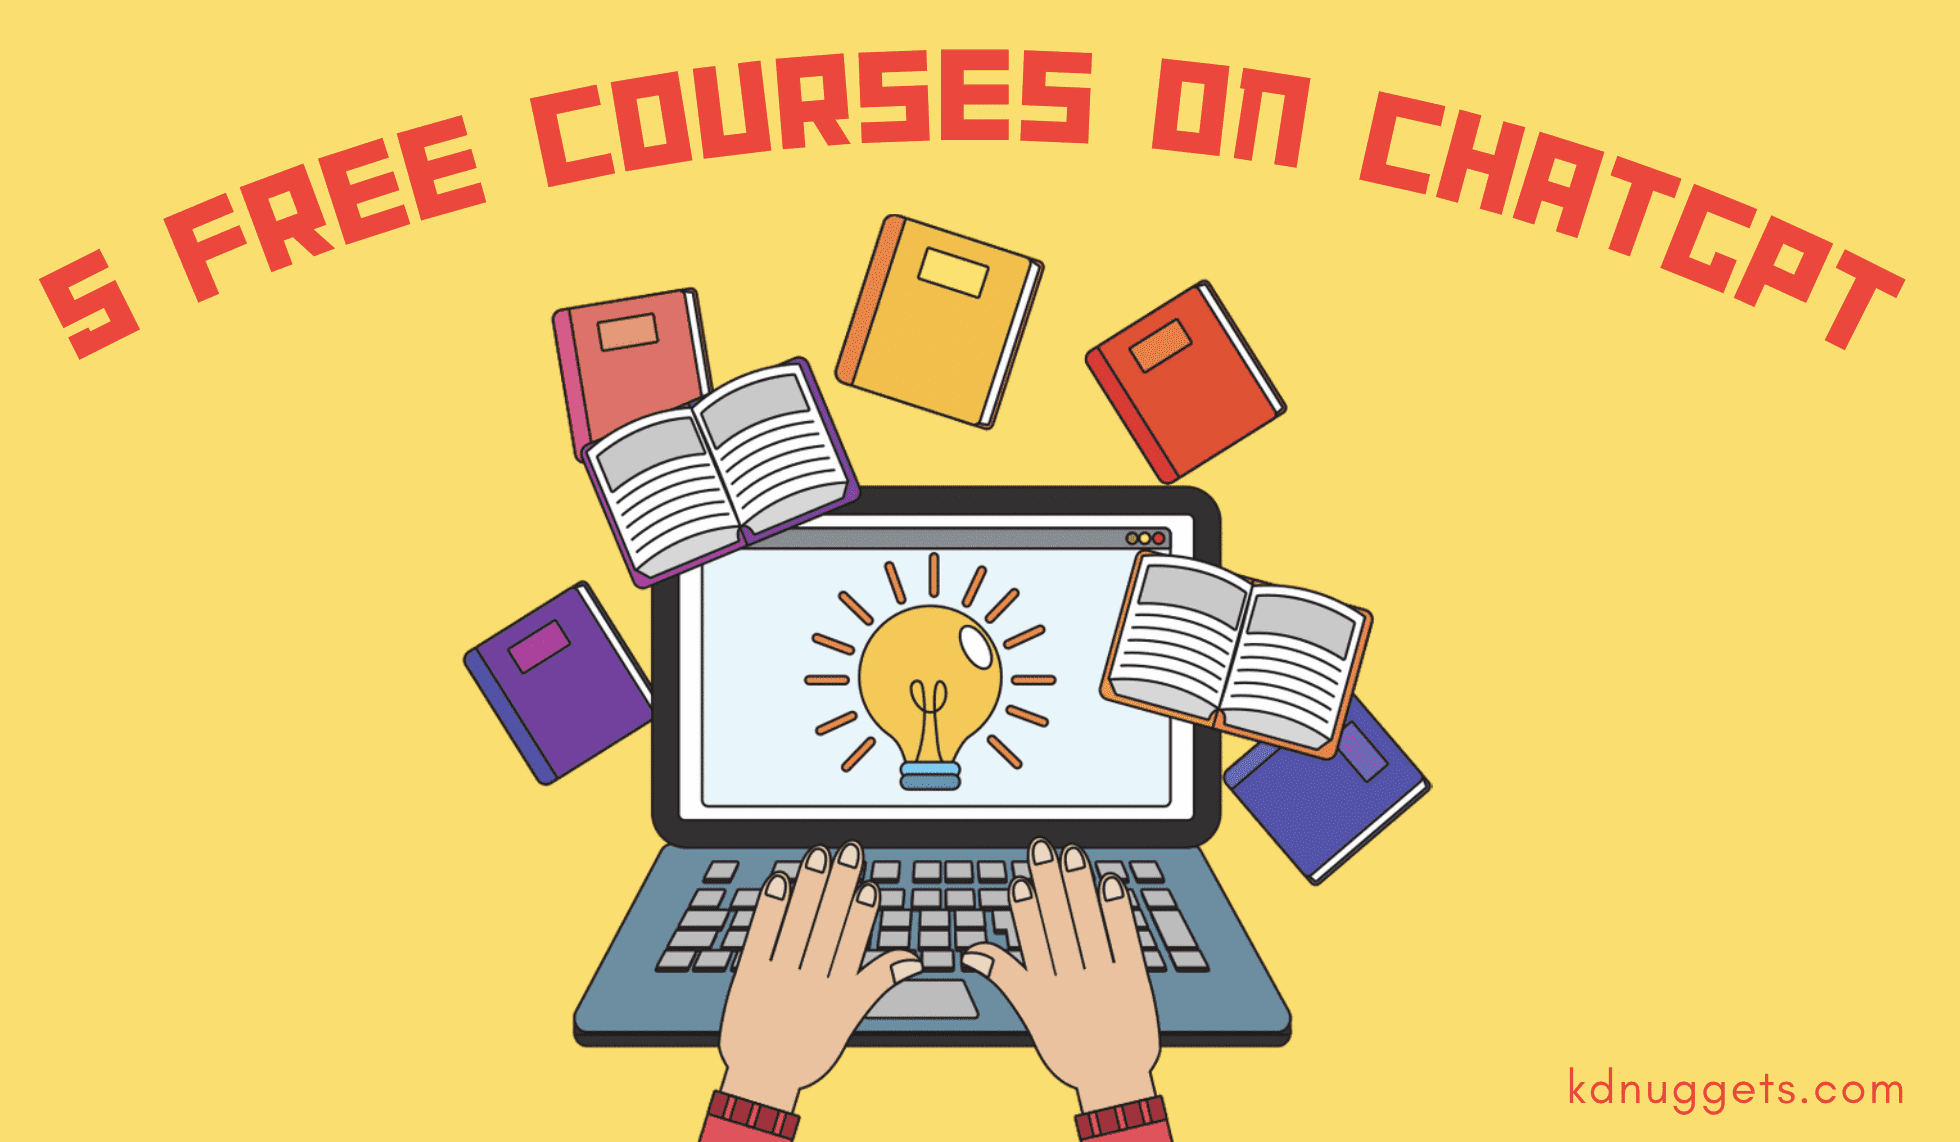 5 Free Courses on ChatGPT